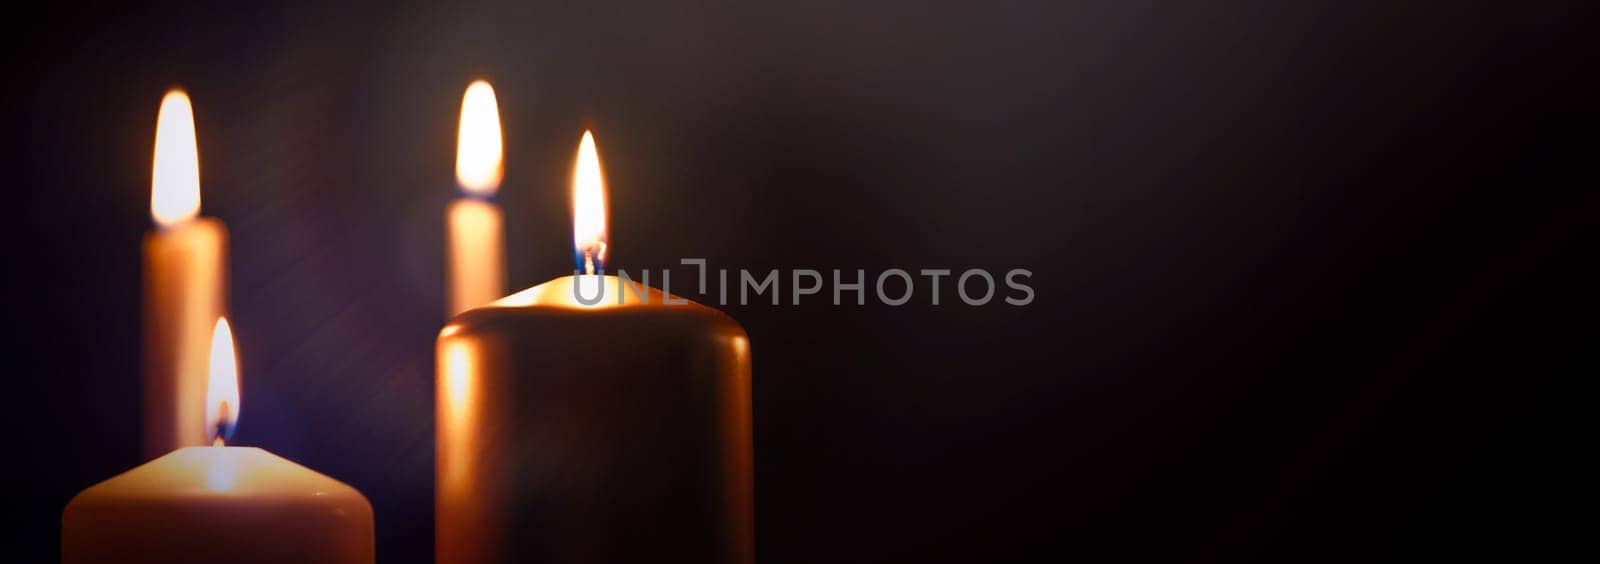 Funeral symbol with burning candle in darkness. Copy space.